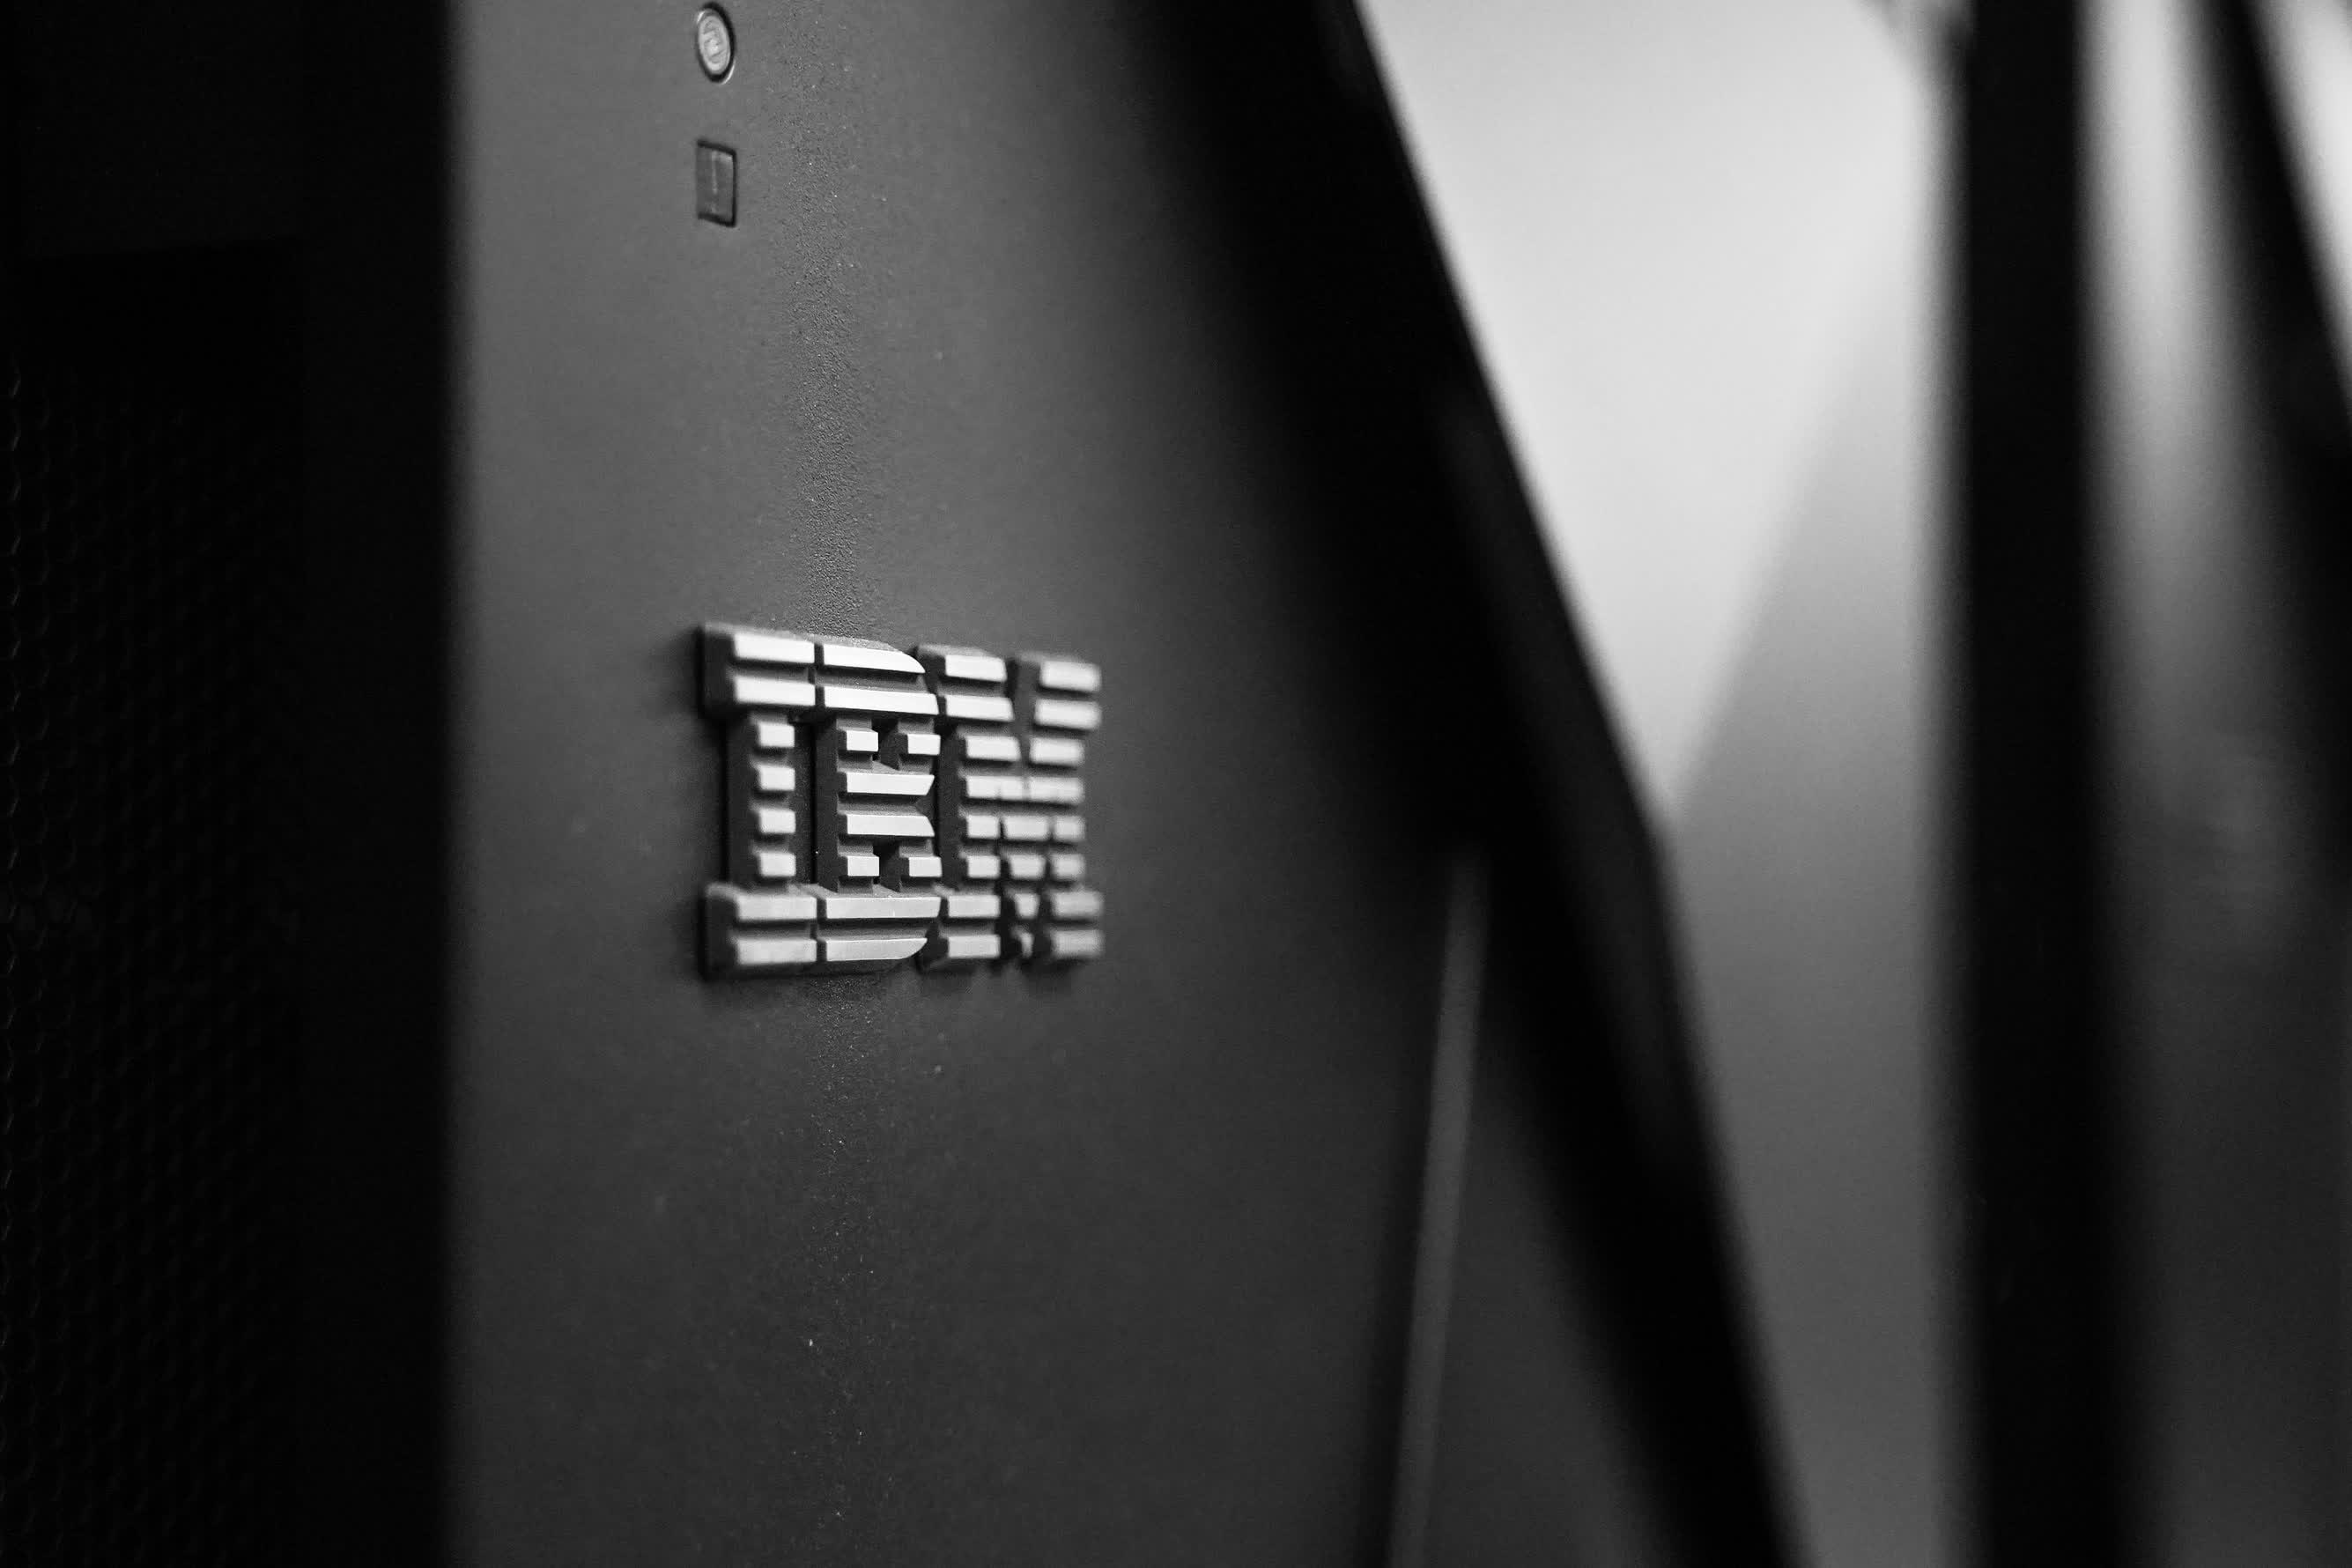 IBM starts laying off employees in Russia, three months after suspending operations in the country